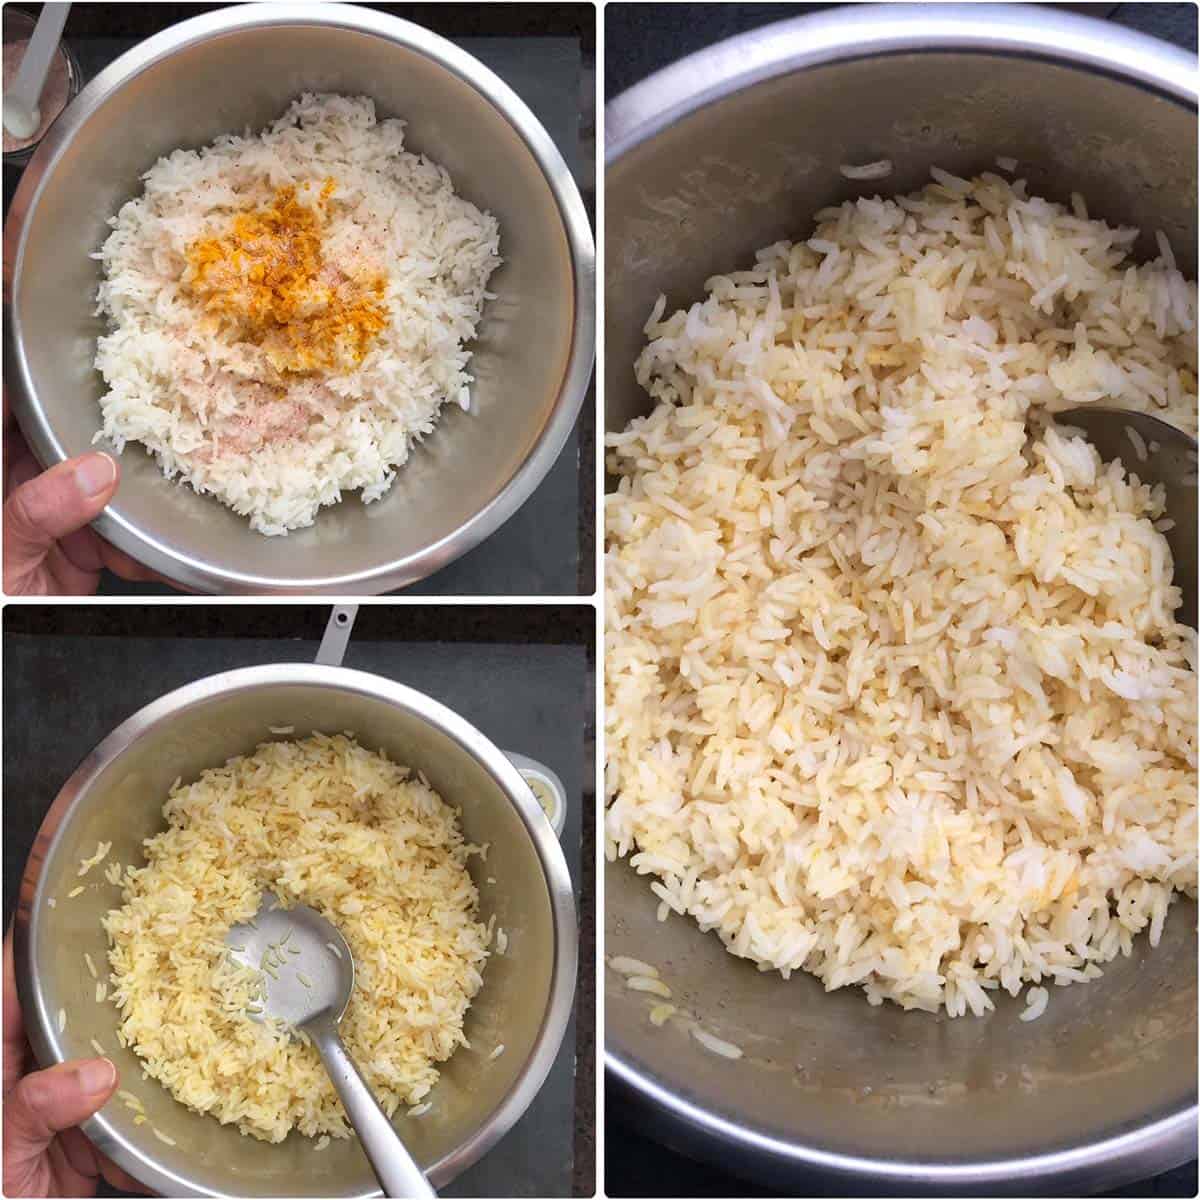 3 panel photo showing the mixing of turmeric and salt to cooked rice.